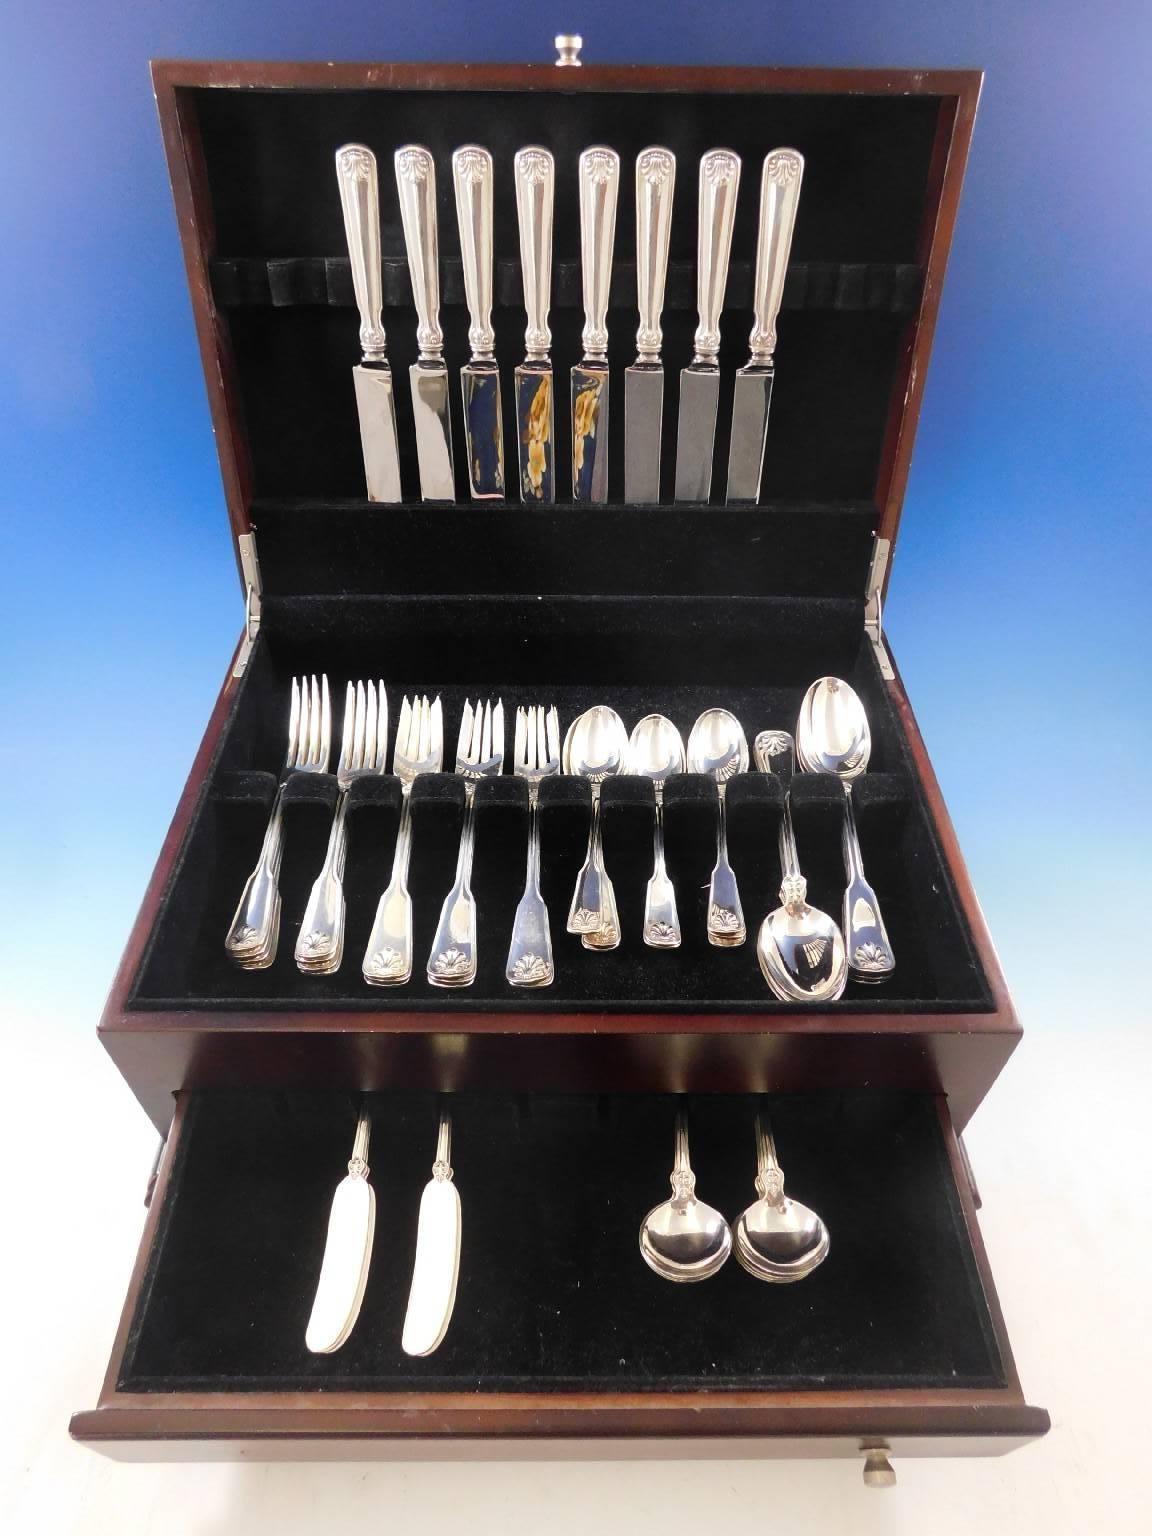 Shell and thread by Tiffany & Co. sterling silver luncheon flatware set, 56 pieces. This set includes:

Eight knives, 9